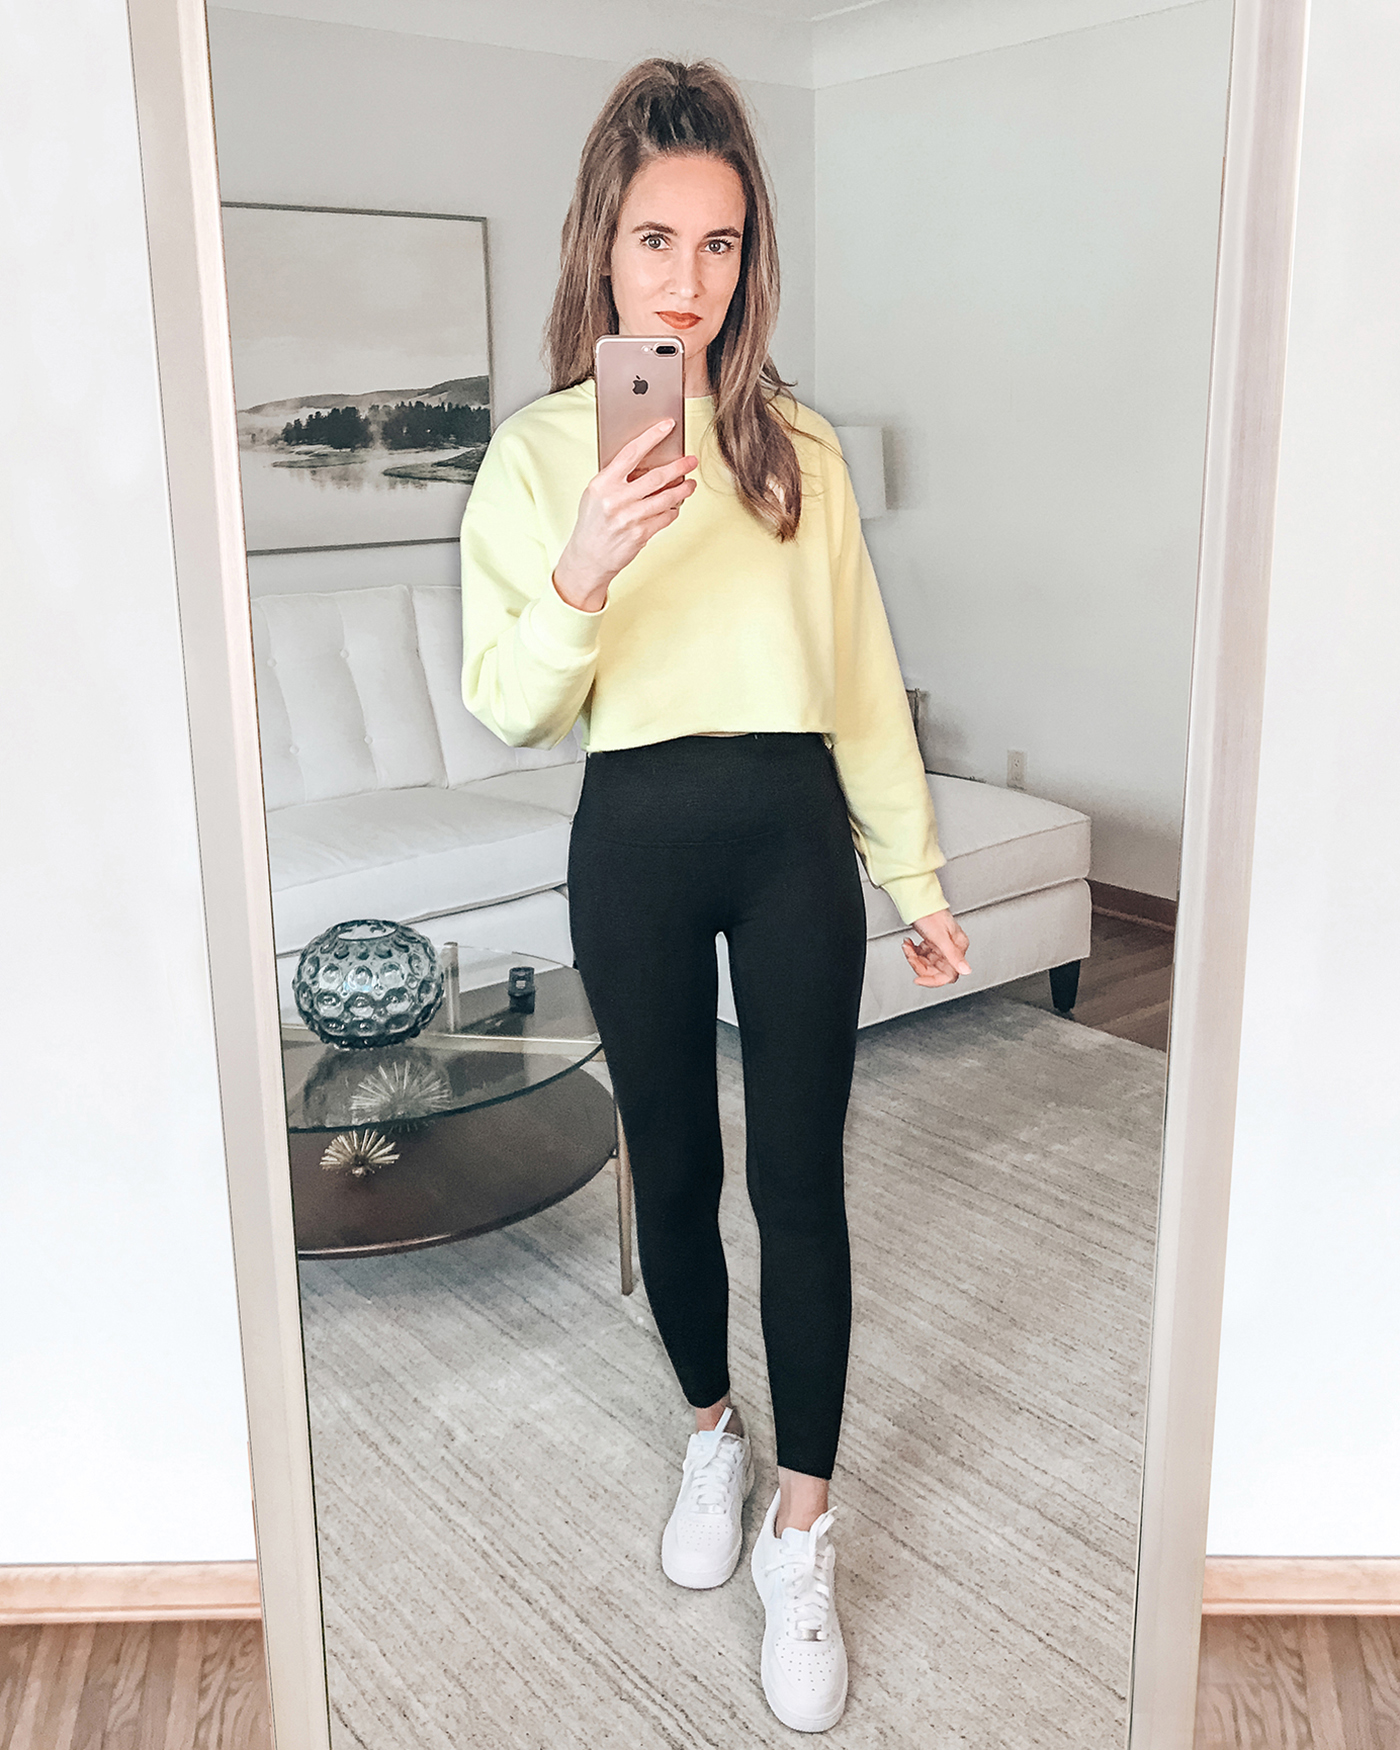 Daily Style Finds: Yellow Sweatshirt, Black Leggings, Nike White Sneakers